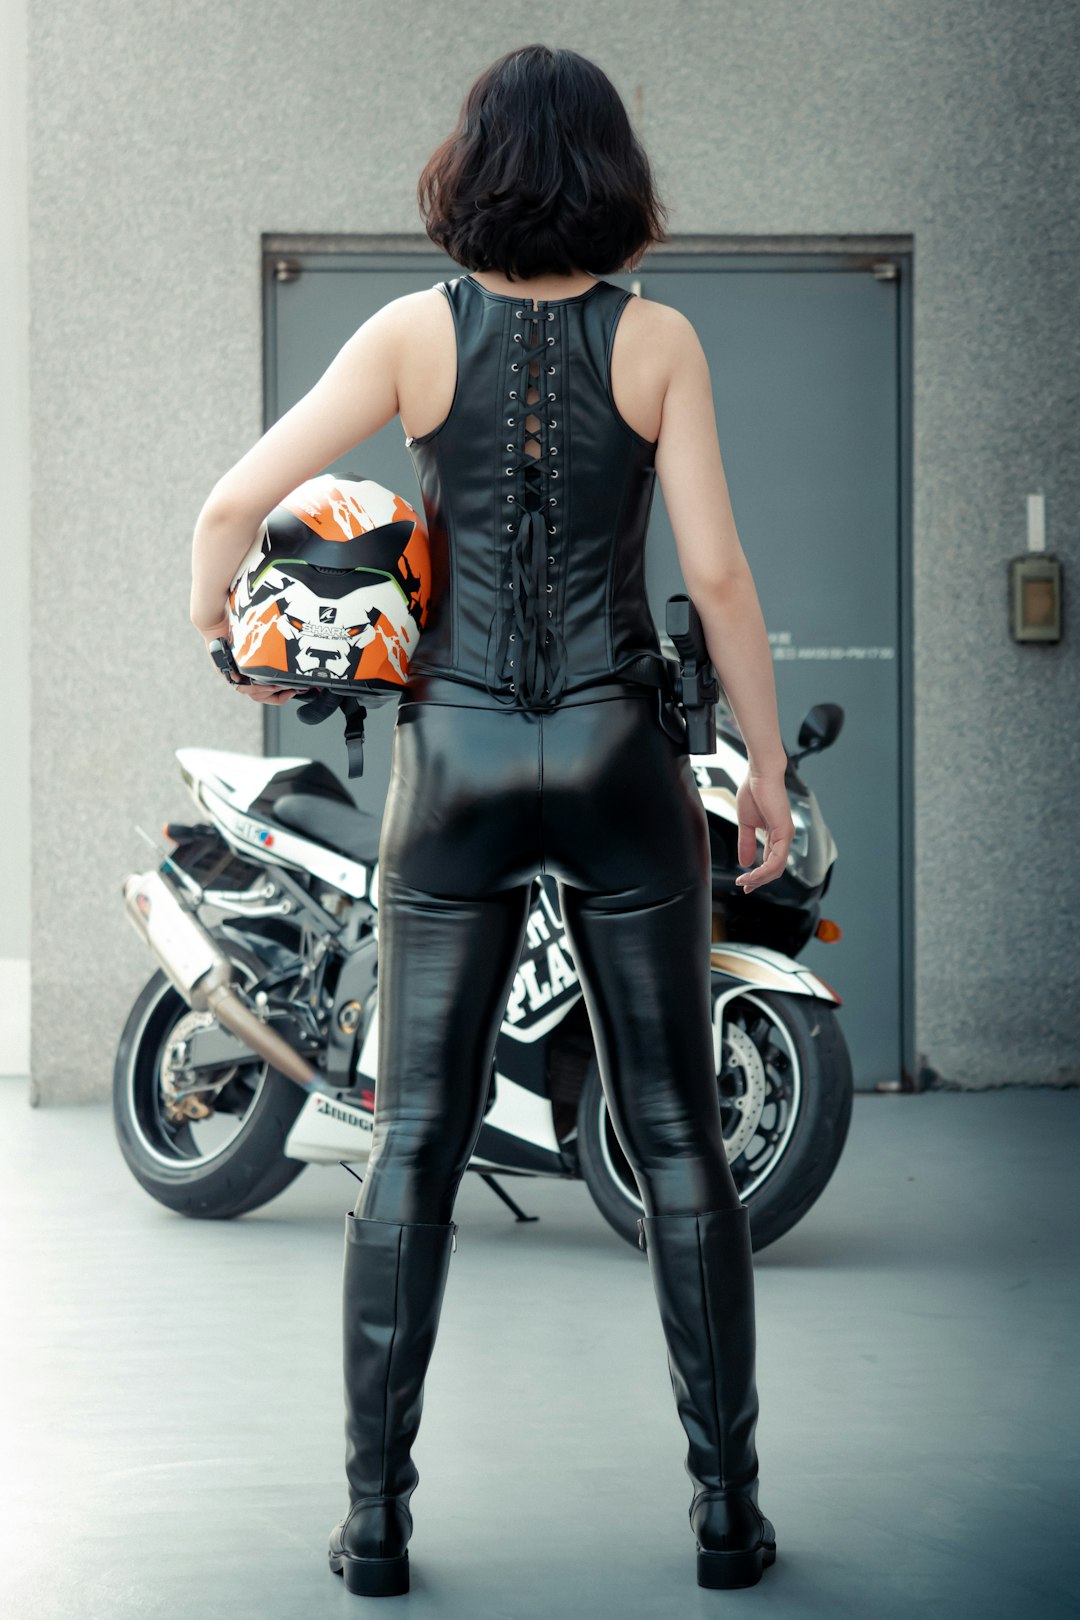 woman in black tank top and black leggings riding on black and silver motorcycle